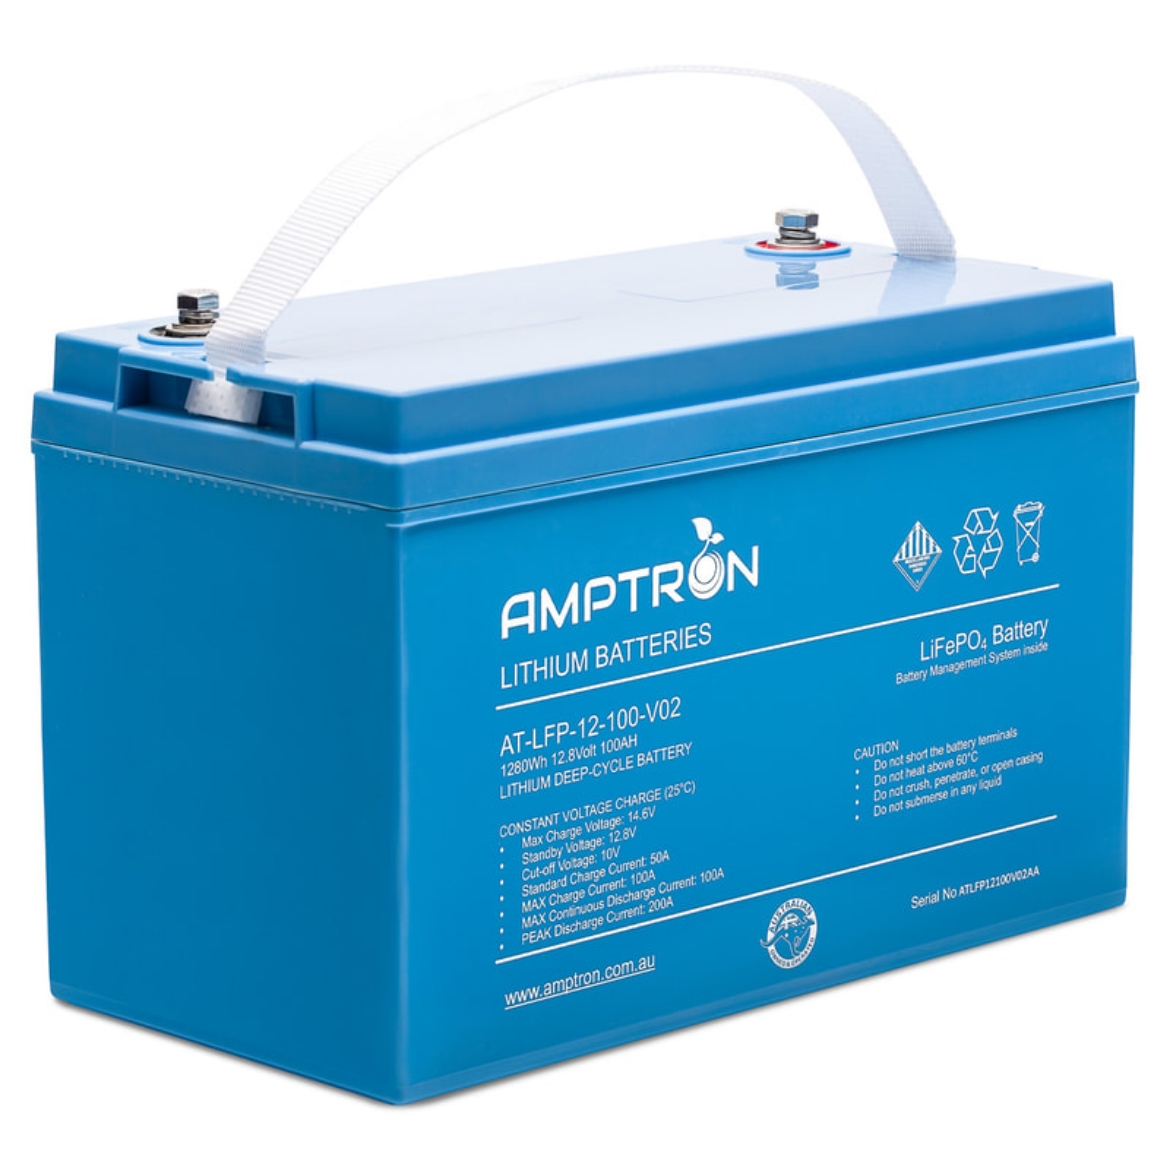 Picture of 12 VOLT 100AH / 100A BMS/ 1280WH CAPACITY LIFEPO4 AMPTRON BATTERY - VERSION 2 - IP65 RATING